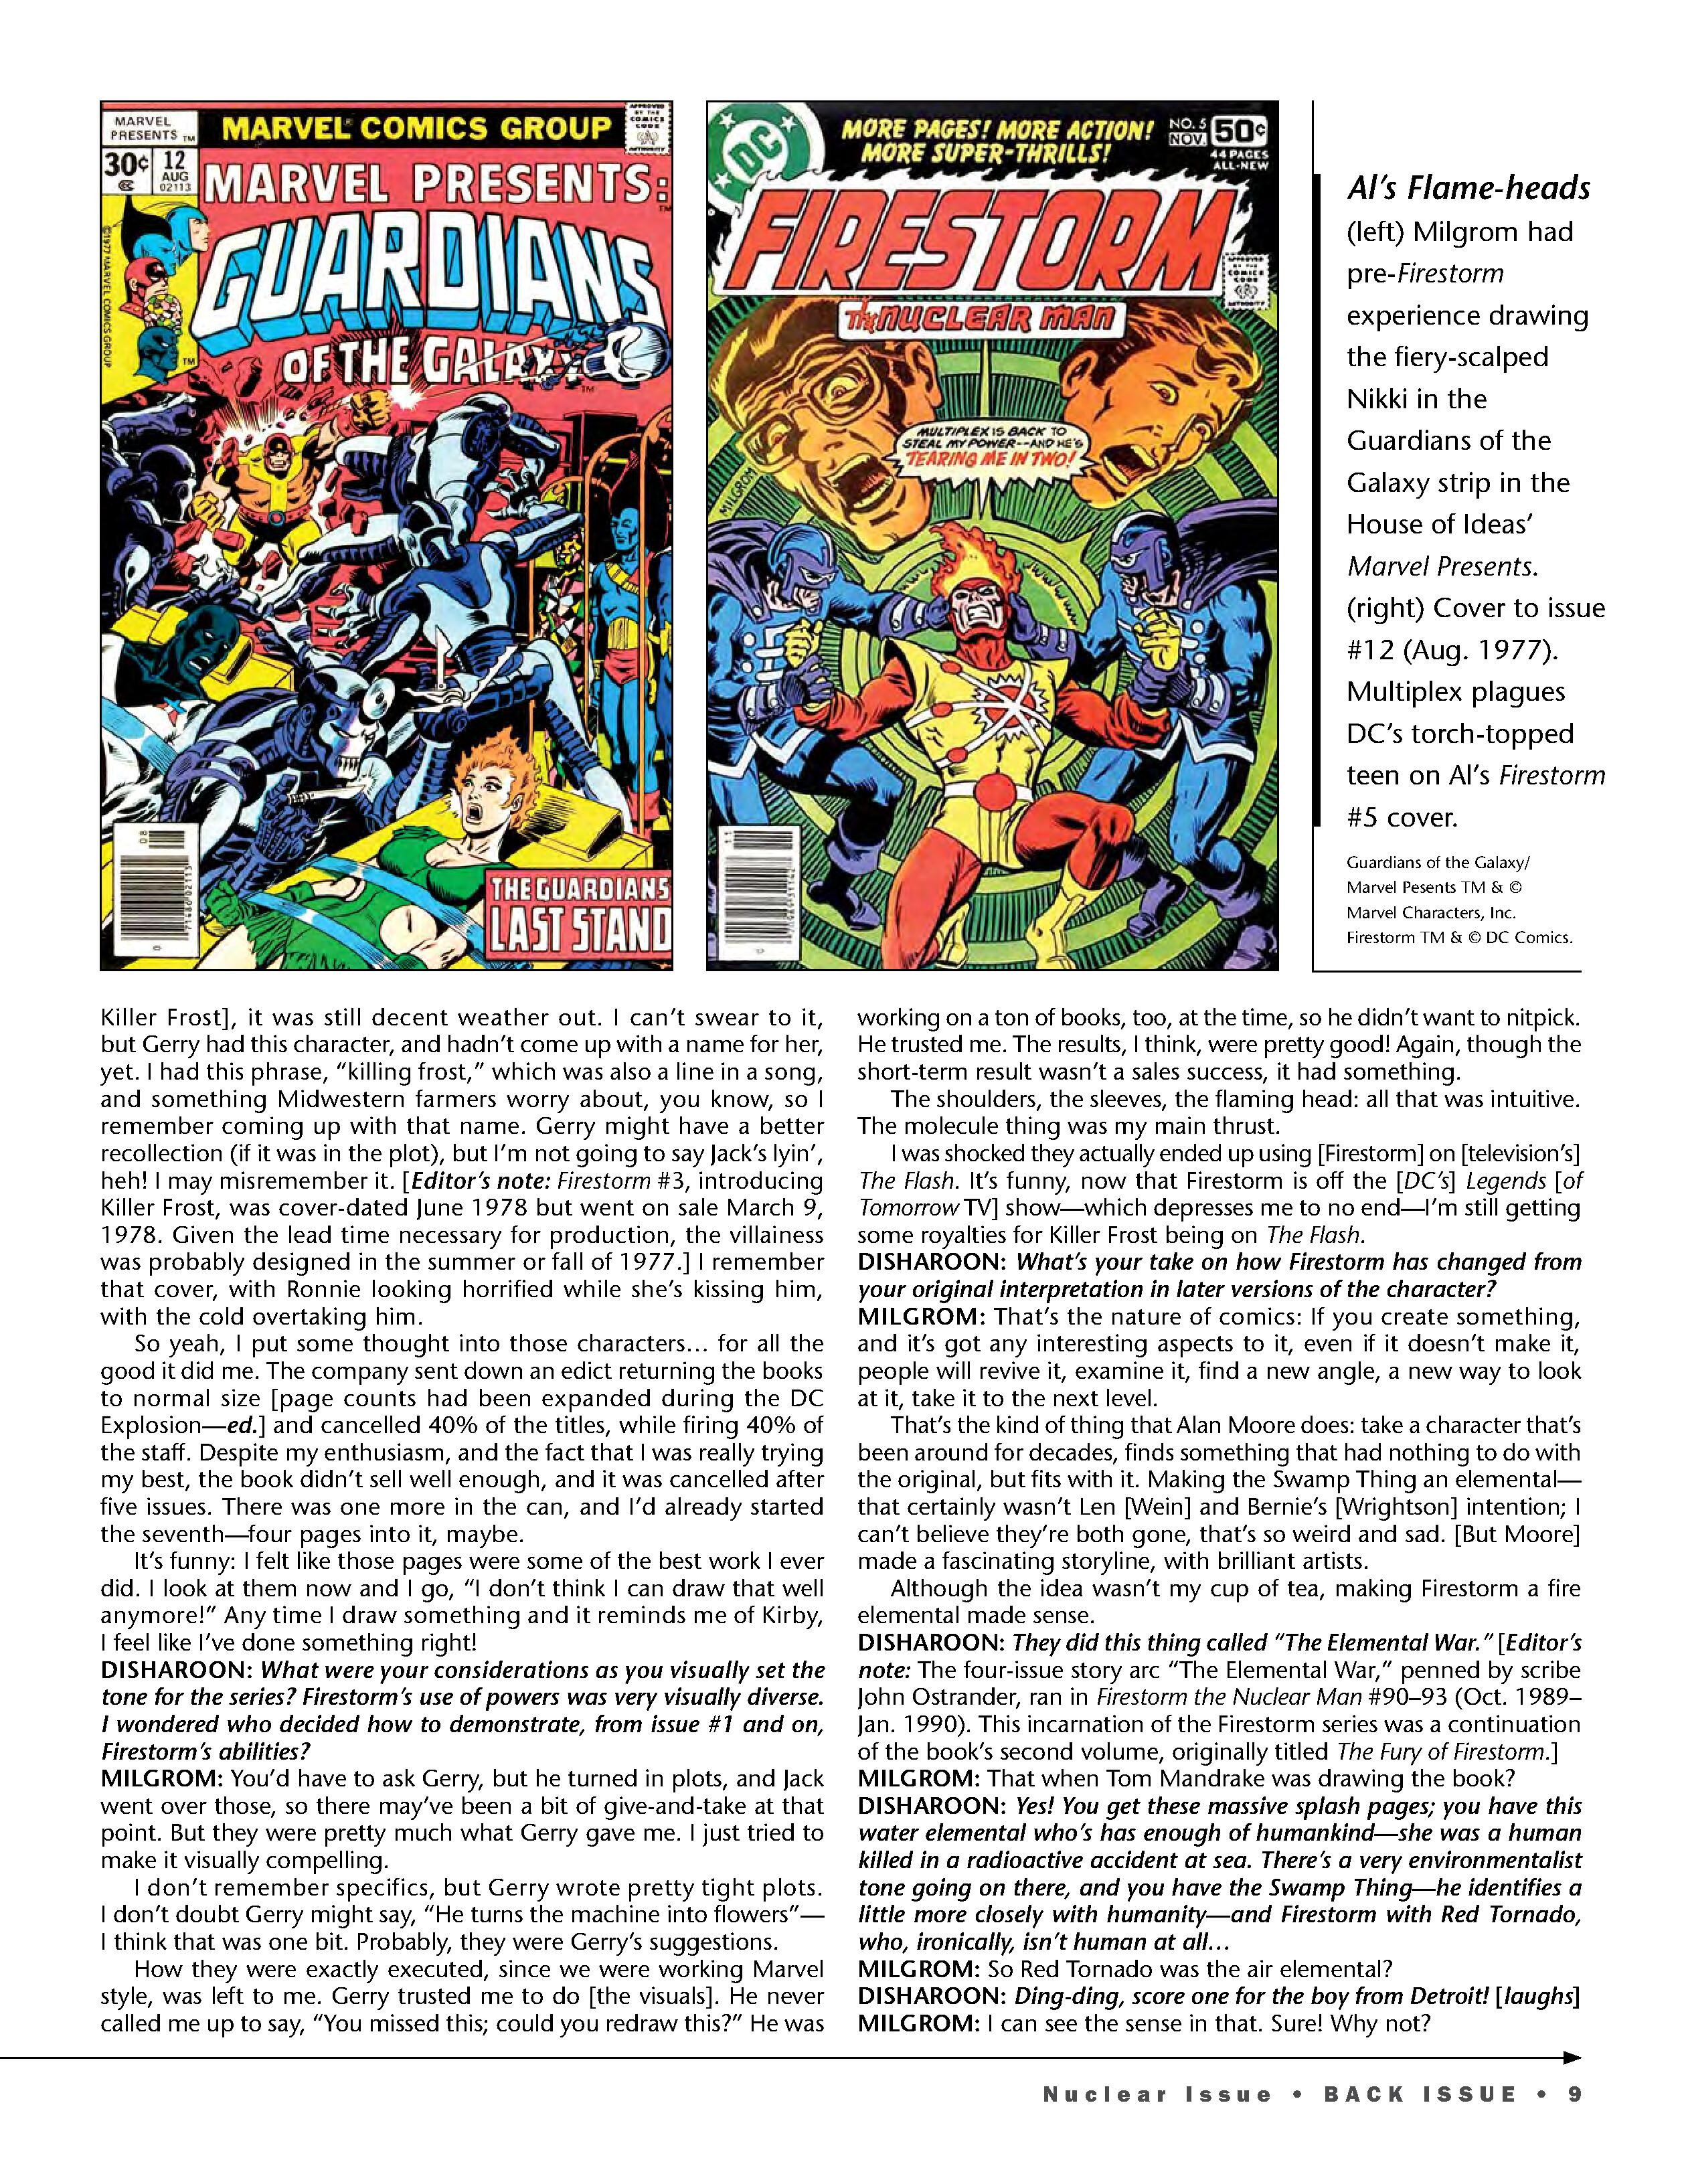 Read online Back Issue comic -  Issue #112 - 11